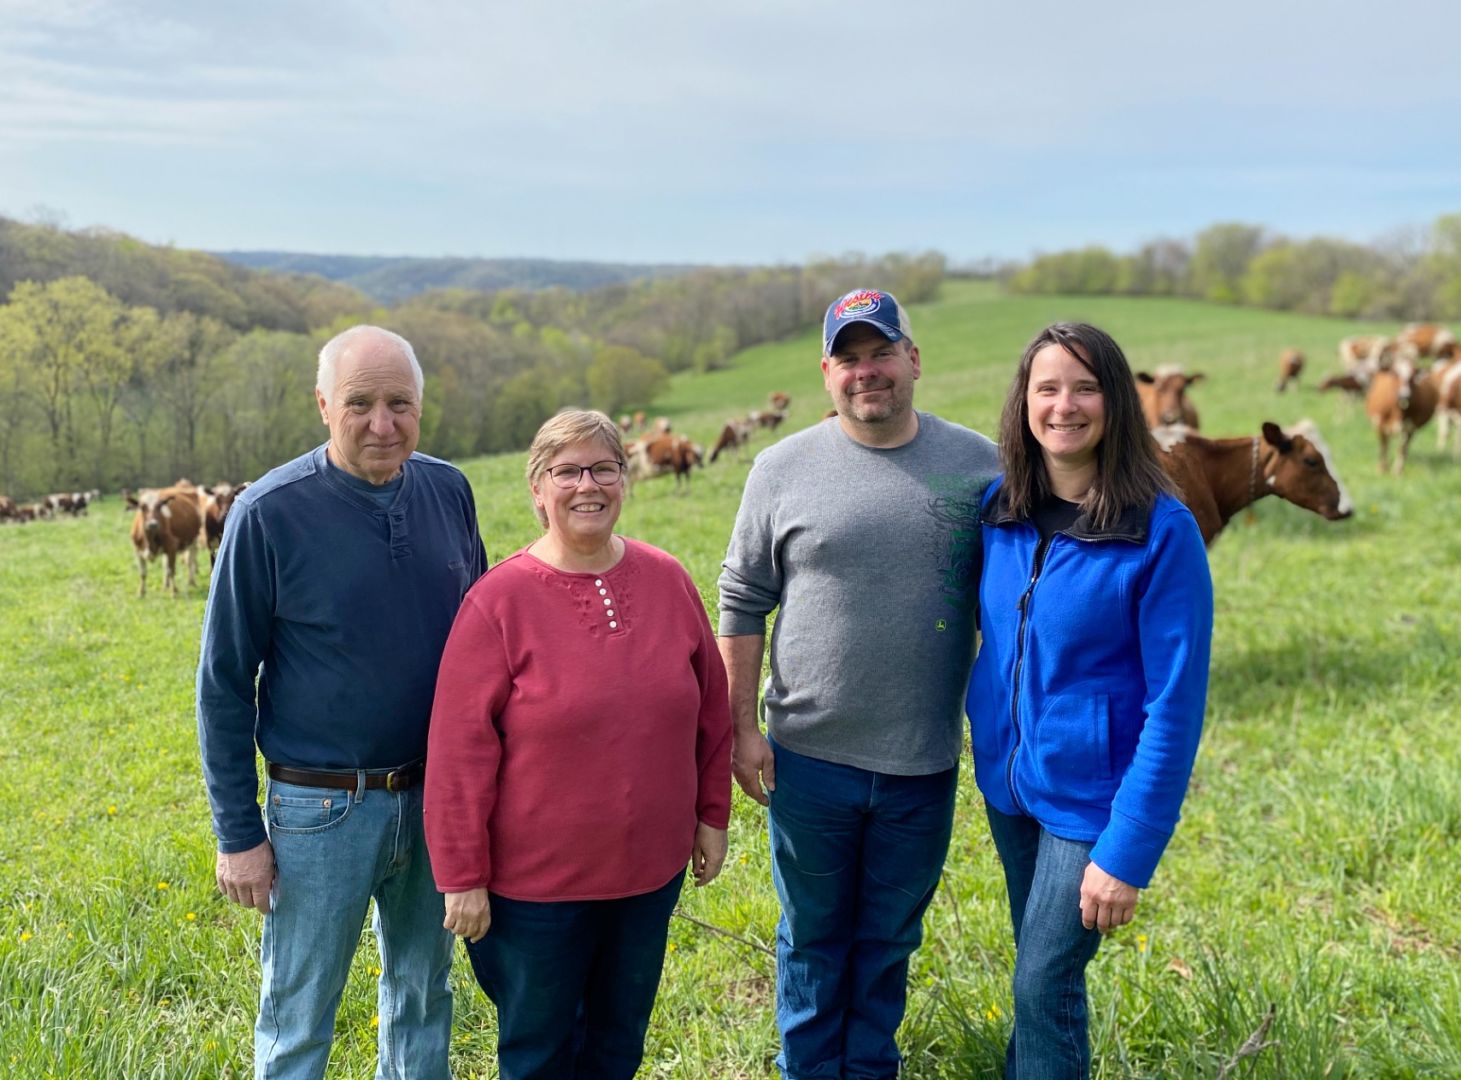 Enchanted Meadows organic dairy farm is operated by Jean and Art Thicke and Melissa and Chad Crowley.